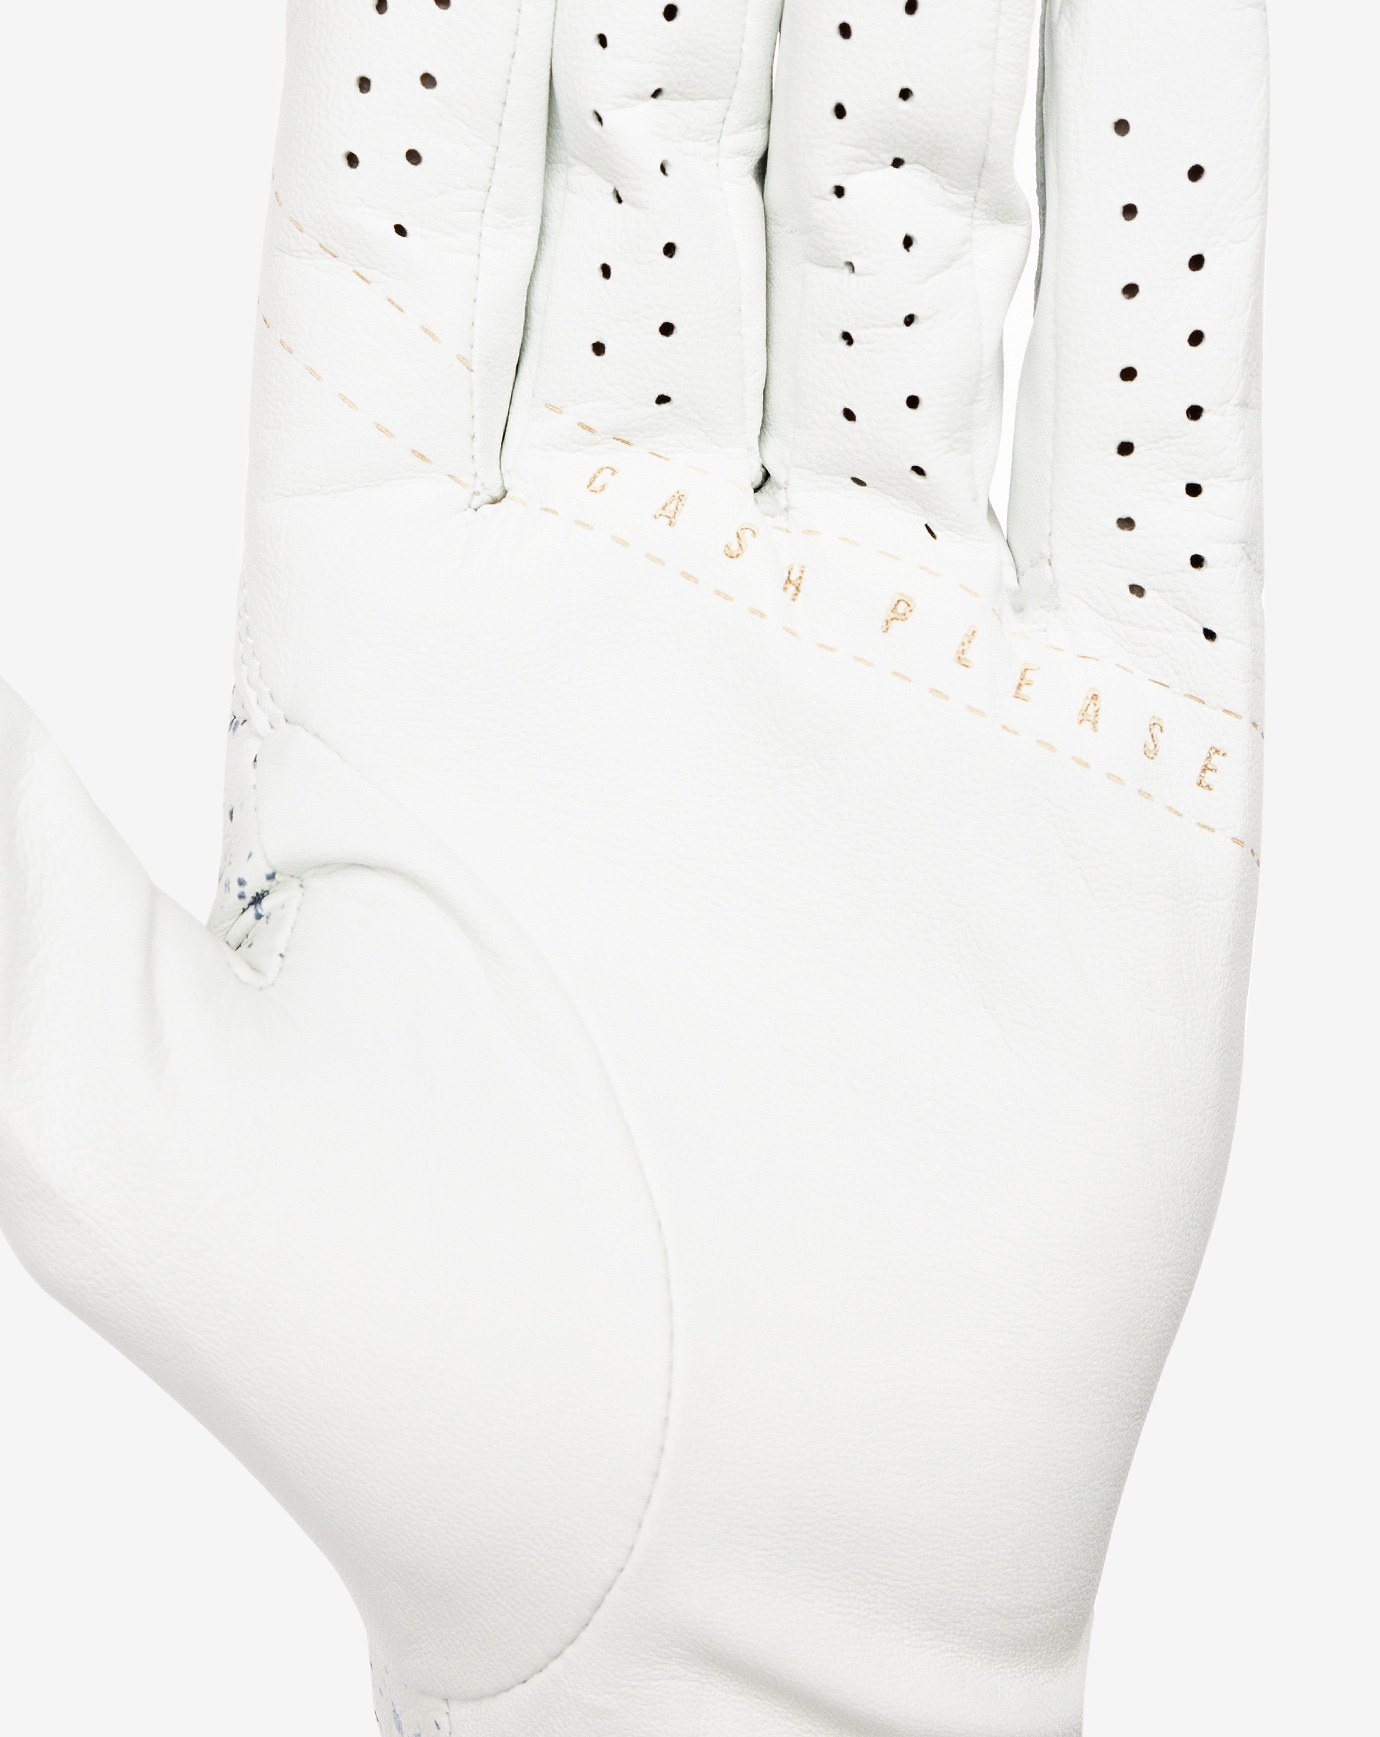 FRONT ROW SEAT GOLF GLOVE Image Thumbnail 4